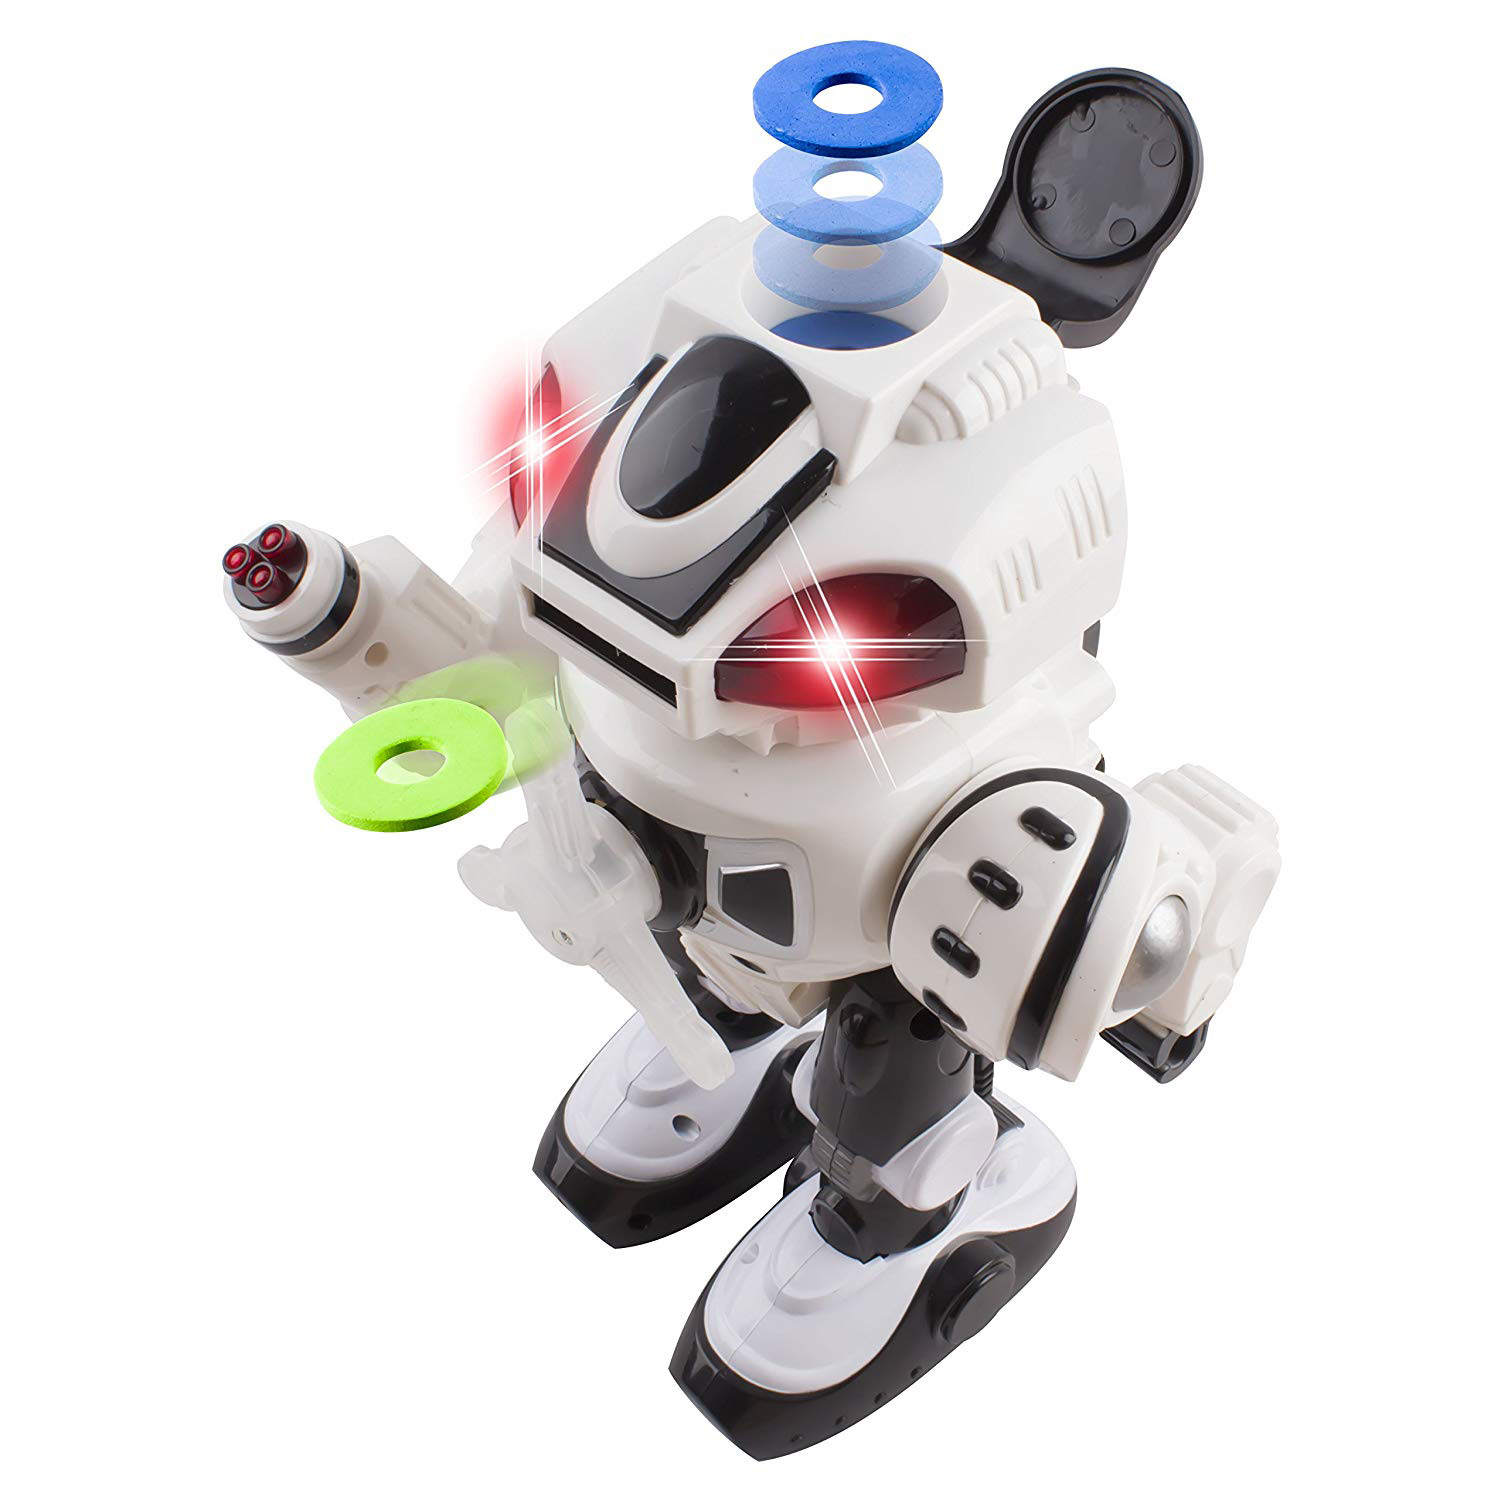 Super Android Toy Robot With Disc Shooting Walking Flashing Lights And Sound Features Great Action Toy For Kids Boys Girls Toddlers Battery Operated White KD-8808C